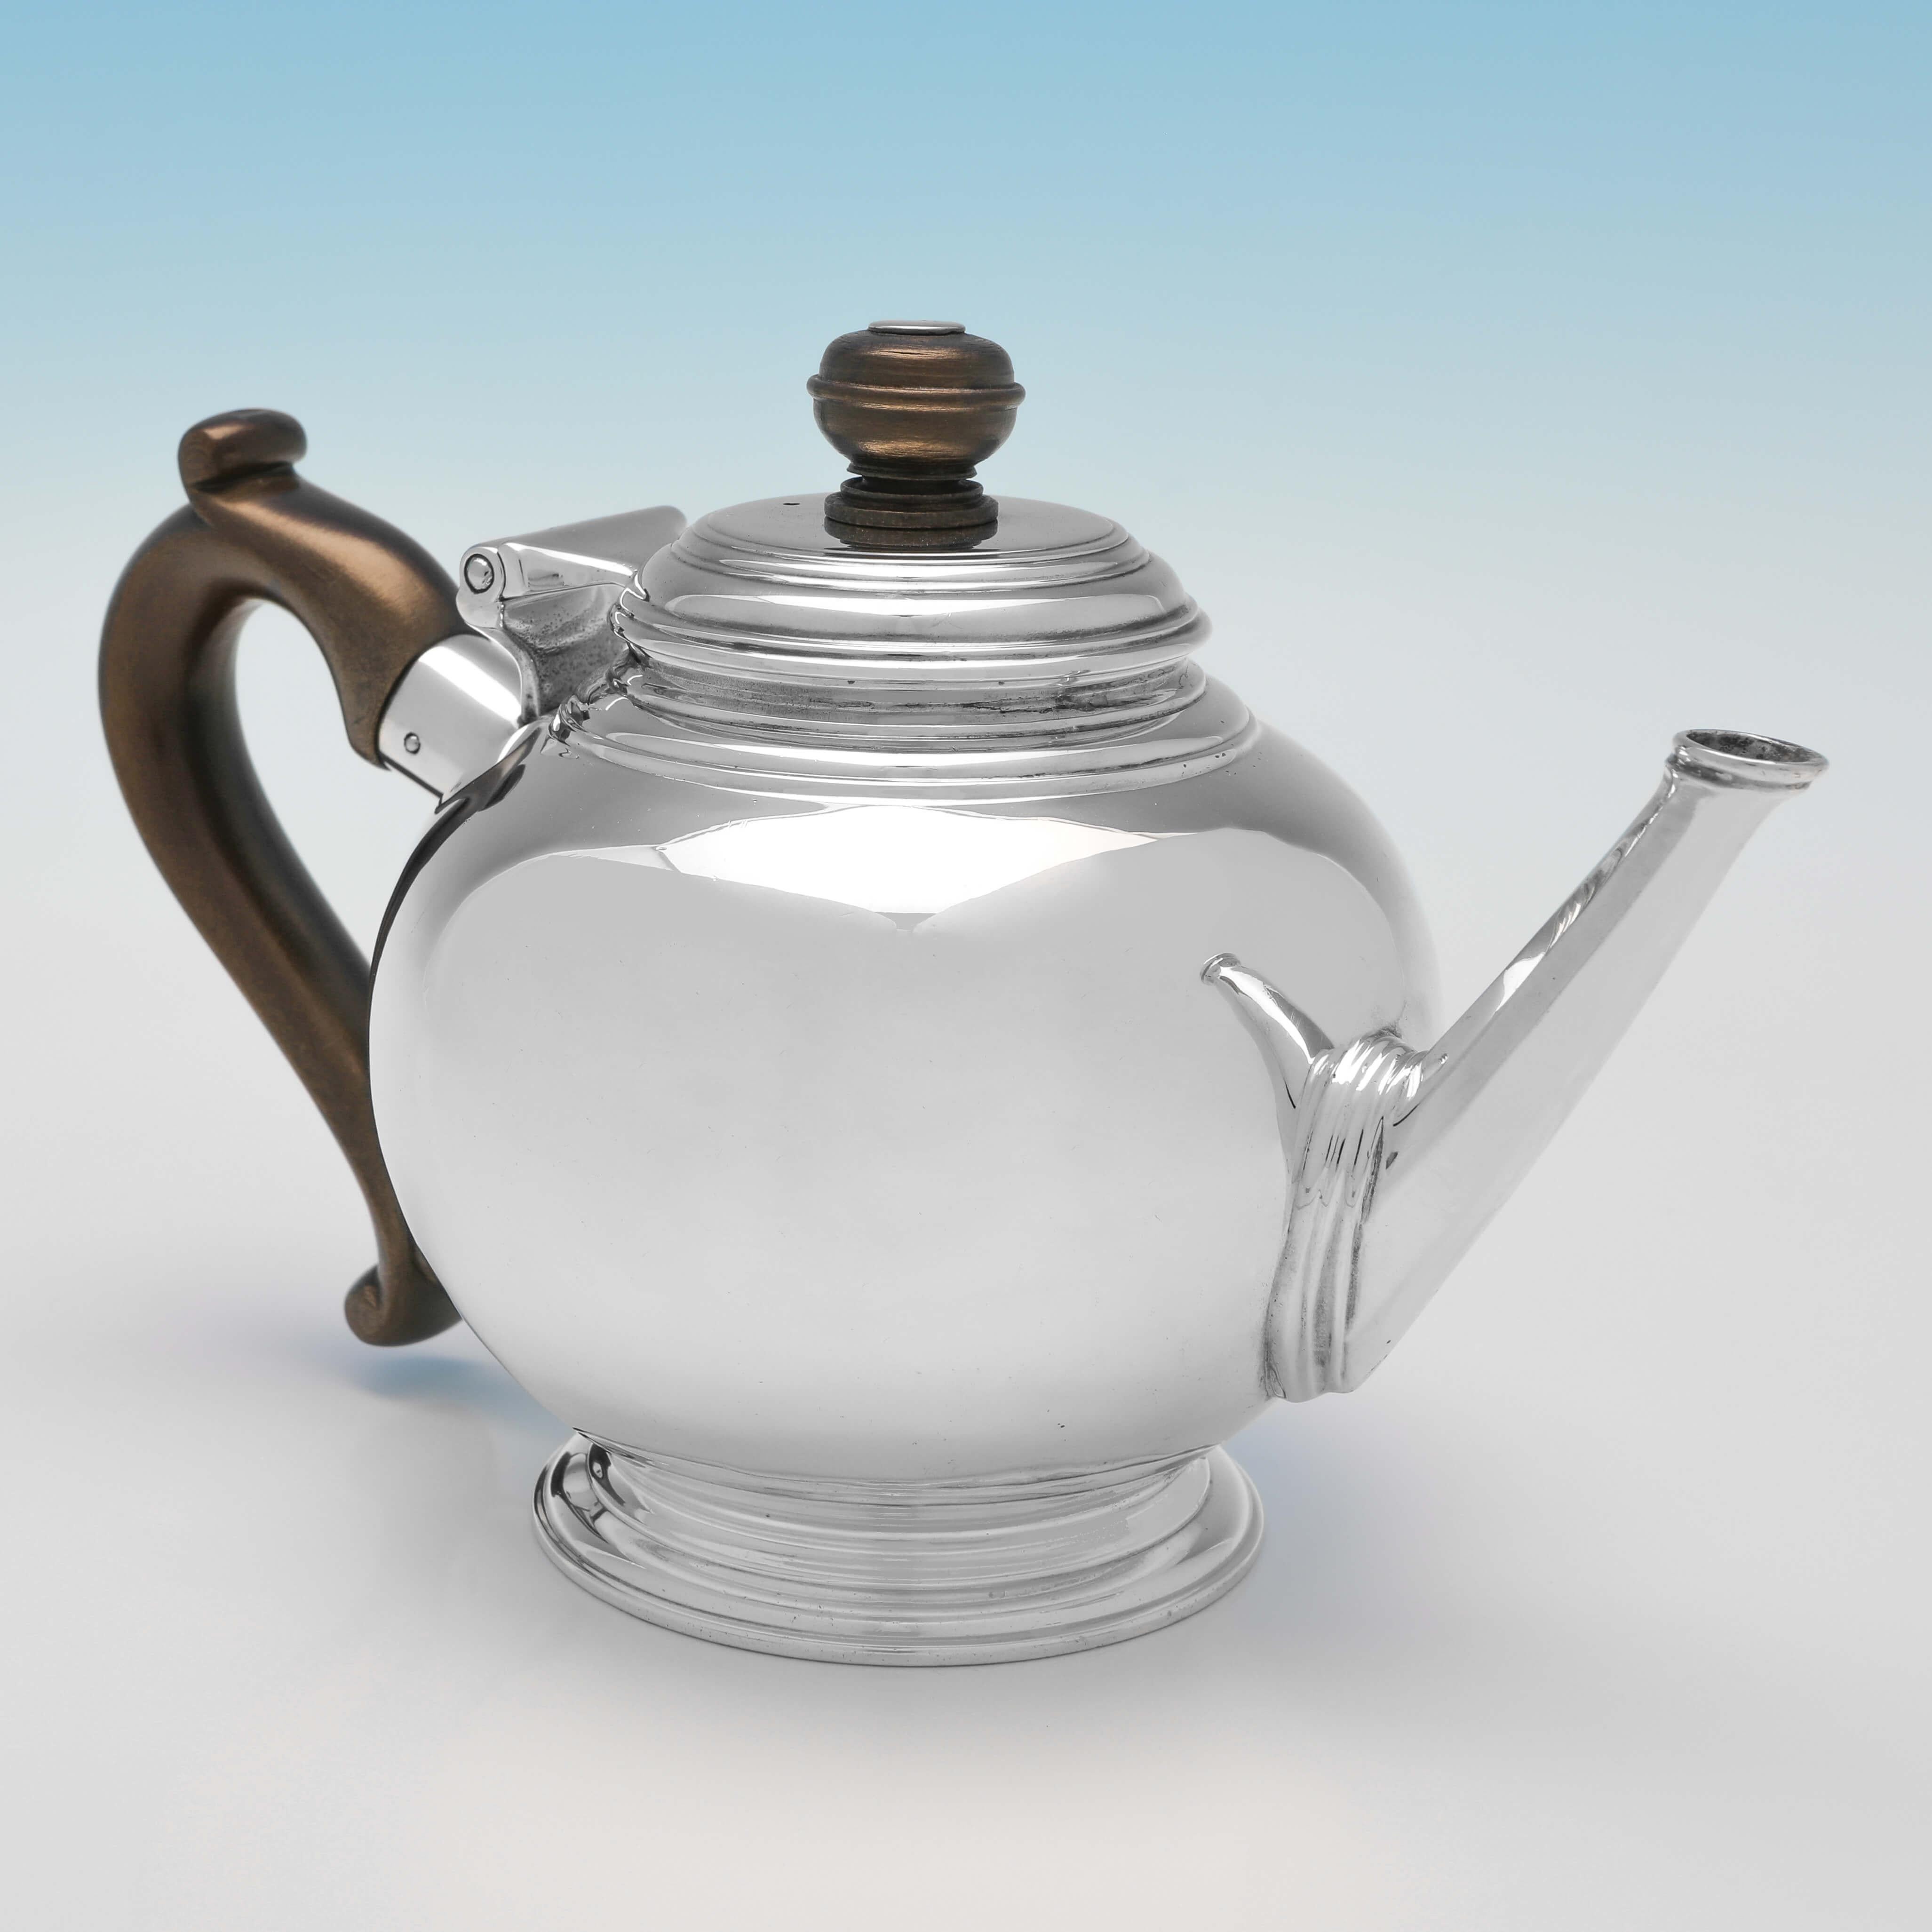 Hallmarked in London in 1929 by Richard Comyns, this very handsome, sterling silver teapot, is plain in style, and features a wooden handle and finial. The teapot measures 4.75